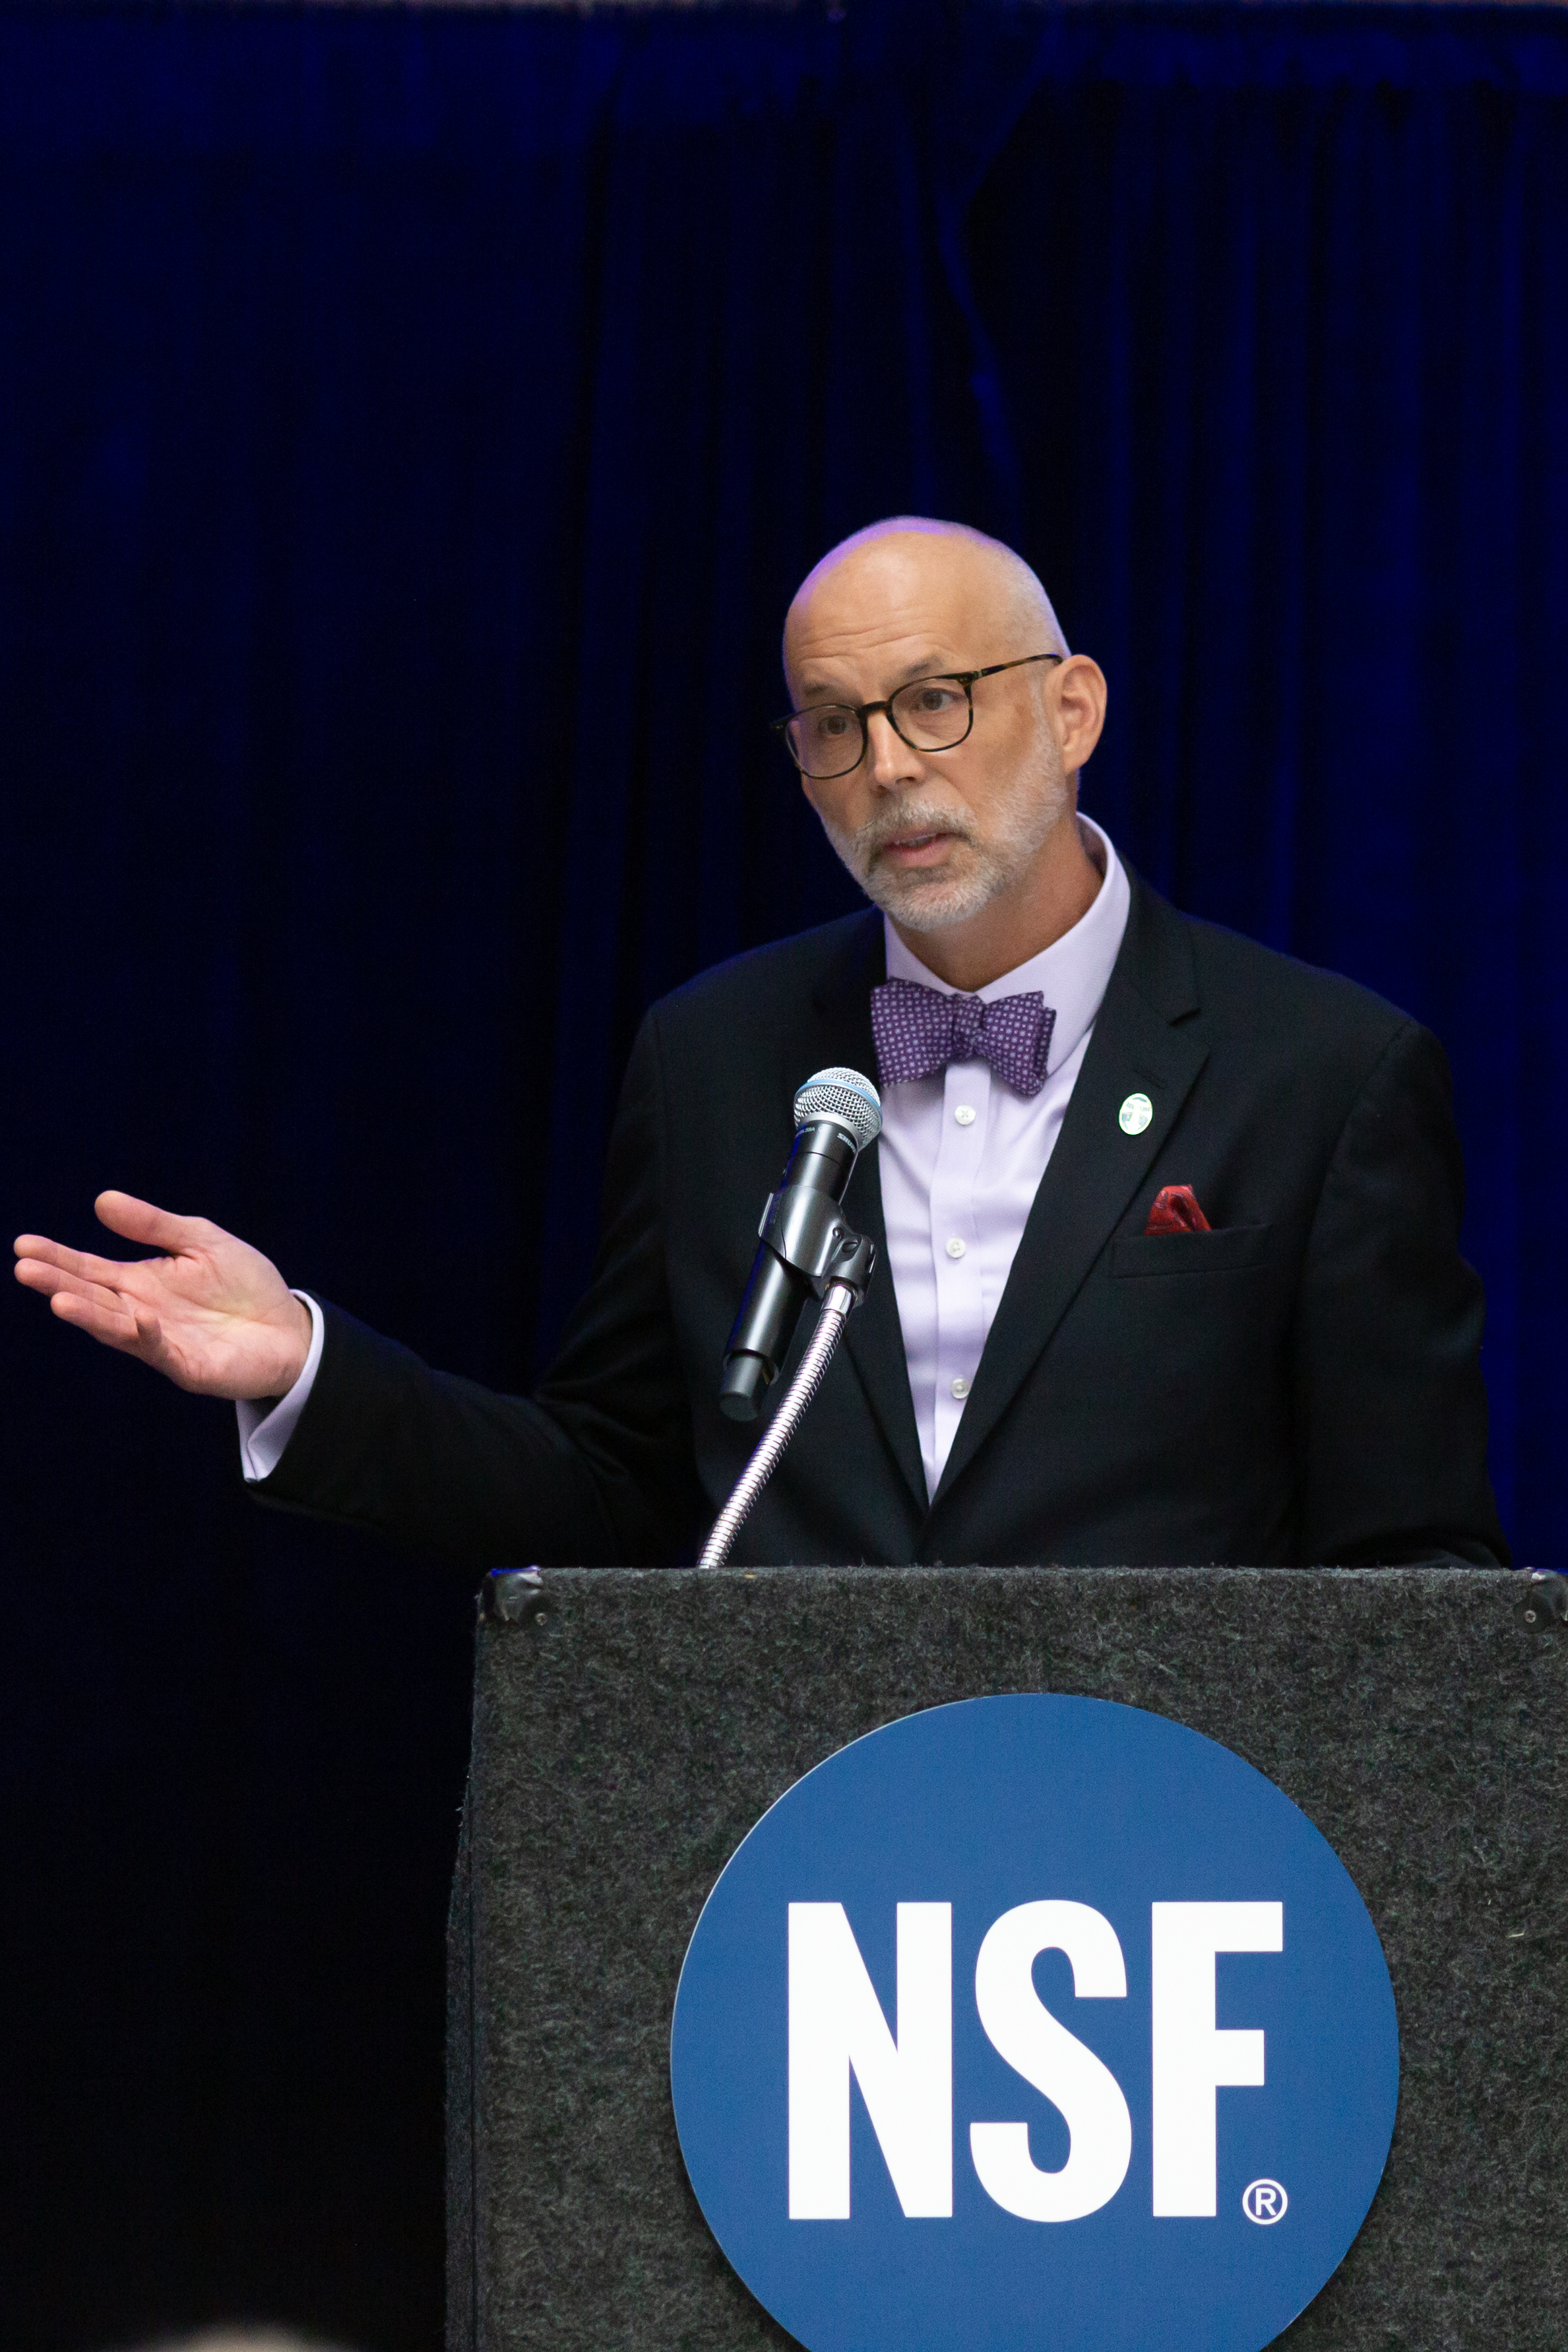 “NSF is a national treasure that will be called on again and again to ensure everyone everywhere can reach their full potential free from preventable harm,” said Dr. David Dyjack, Executive Director and Chief Executive Officer of the National Environmental Health Association (NEHA)